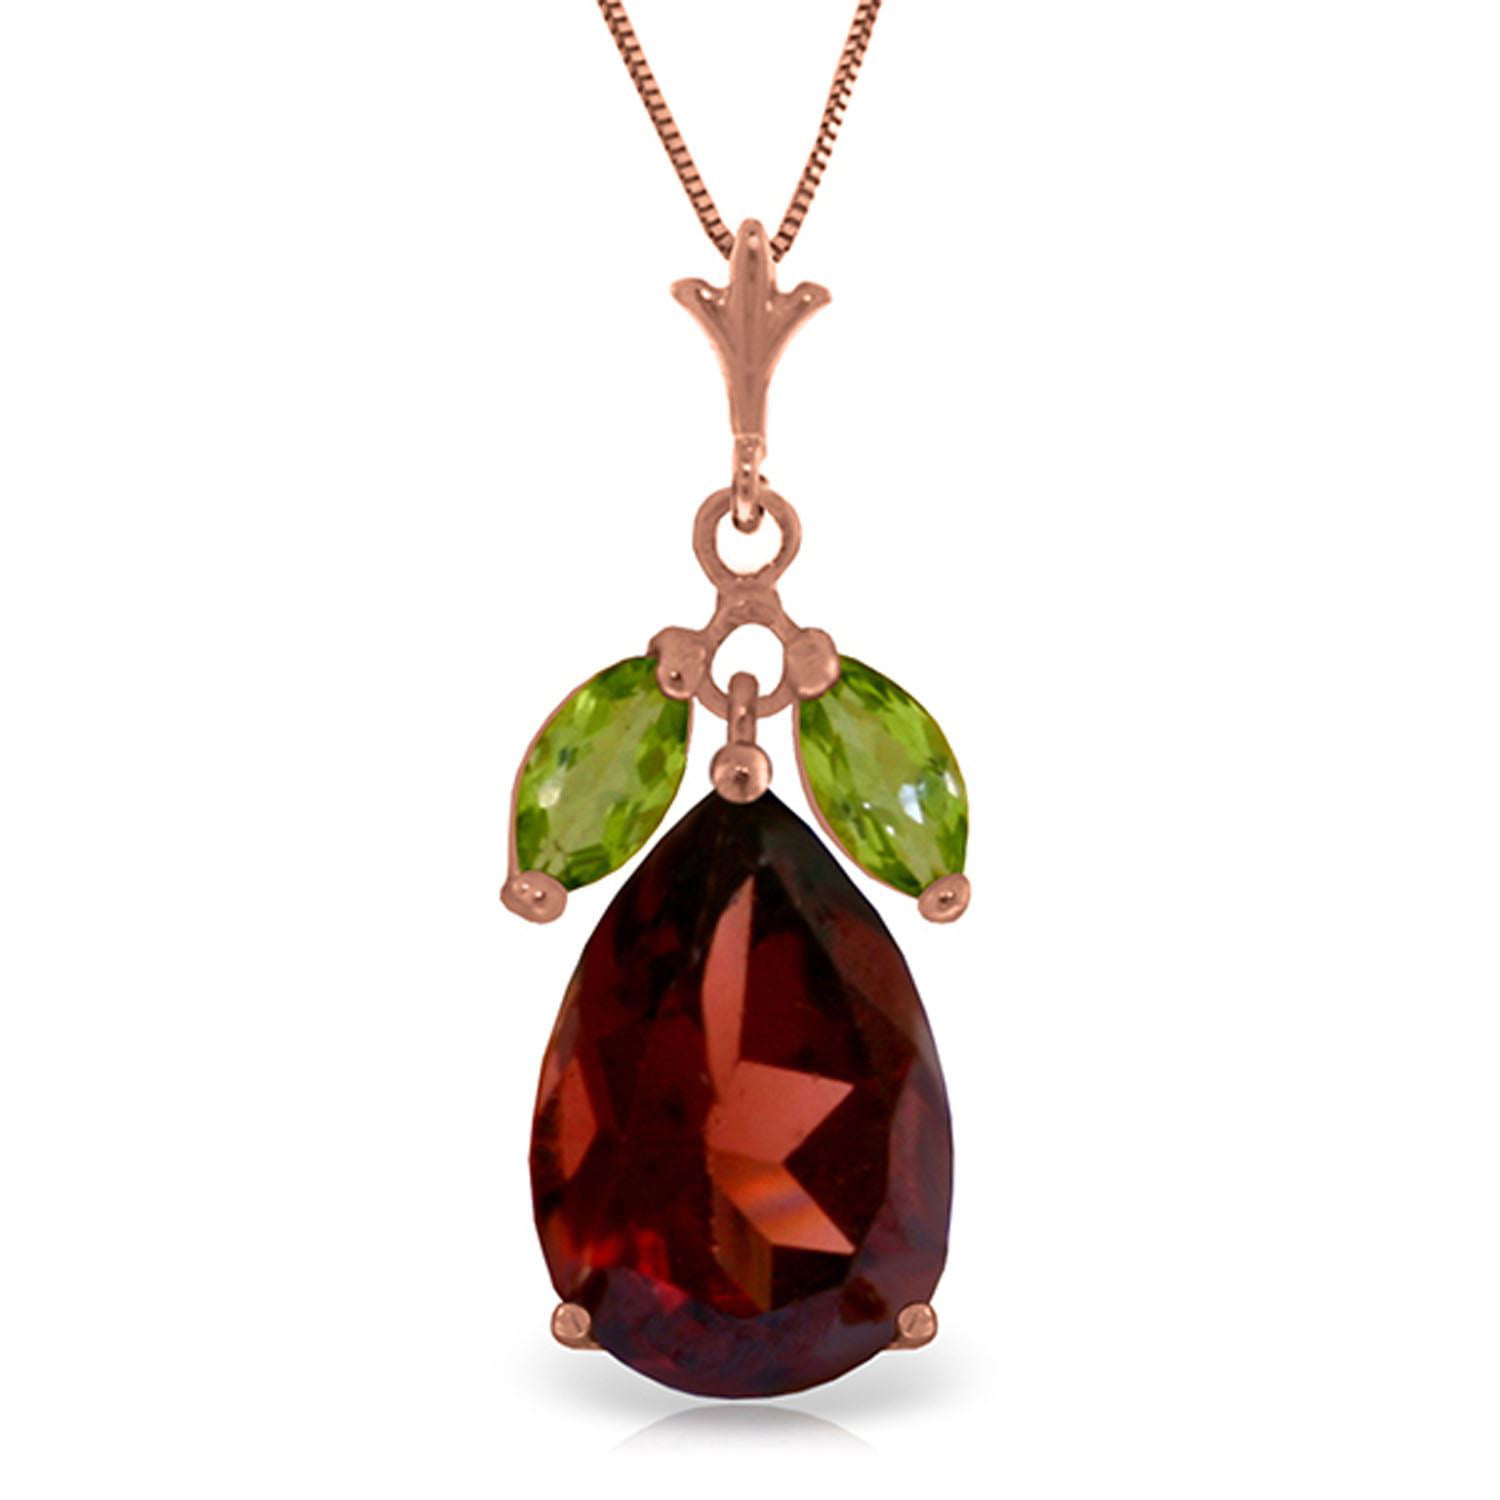 ALARRI 14K Solid Rose Gold Necklace w/ Garnets & Peridots with 24 Inch Chain Length